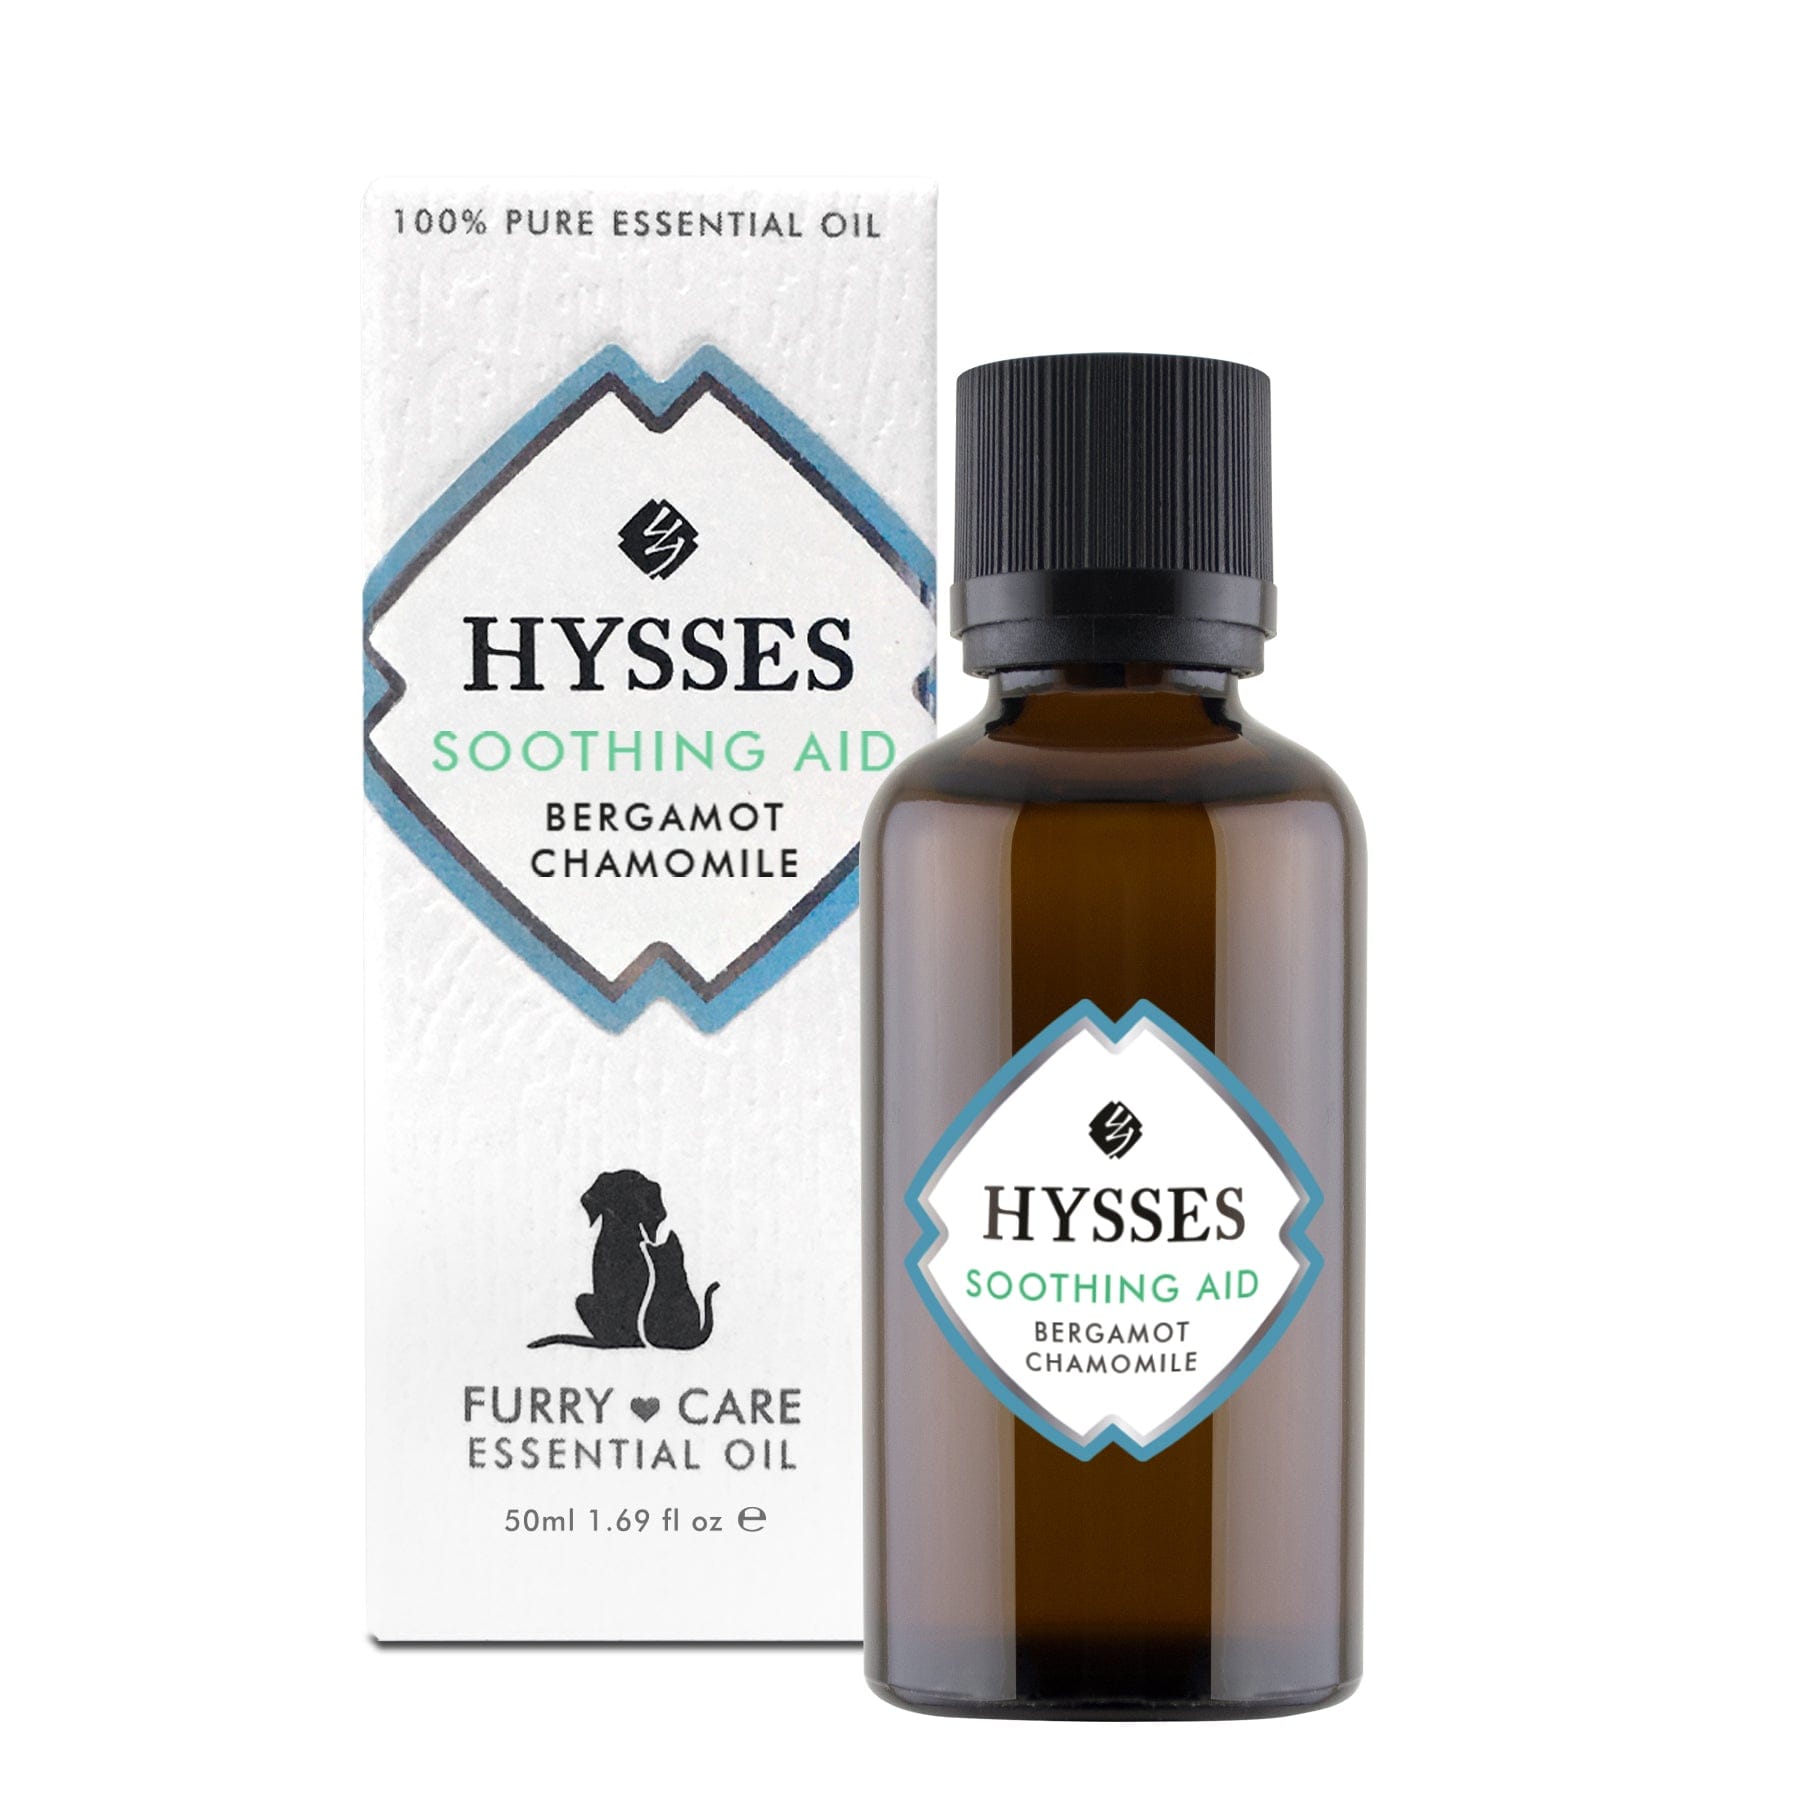 Hysses Essential Oil 50ml FurryCare, Soothing Aid